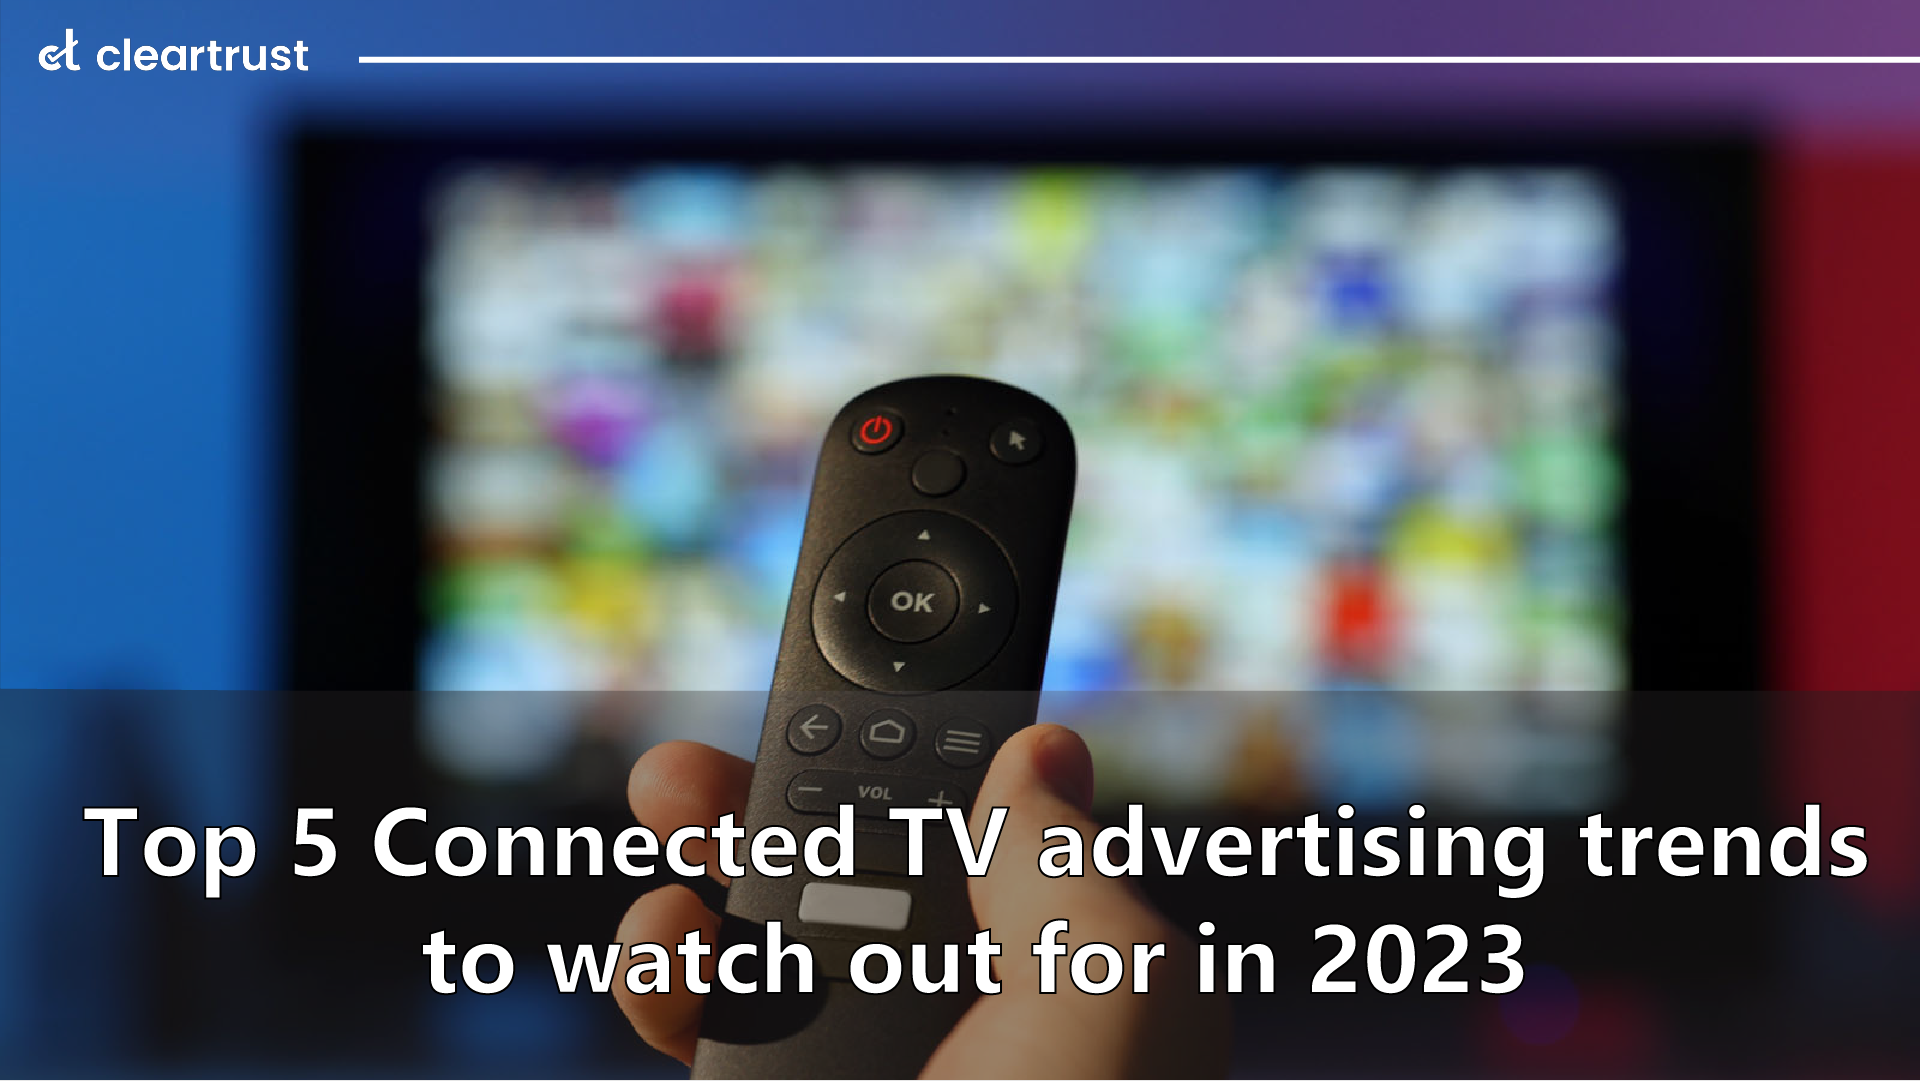 Top 5 Connected TV Advertising Trends to Watch Out for in 2023